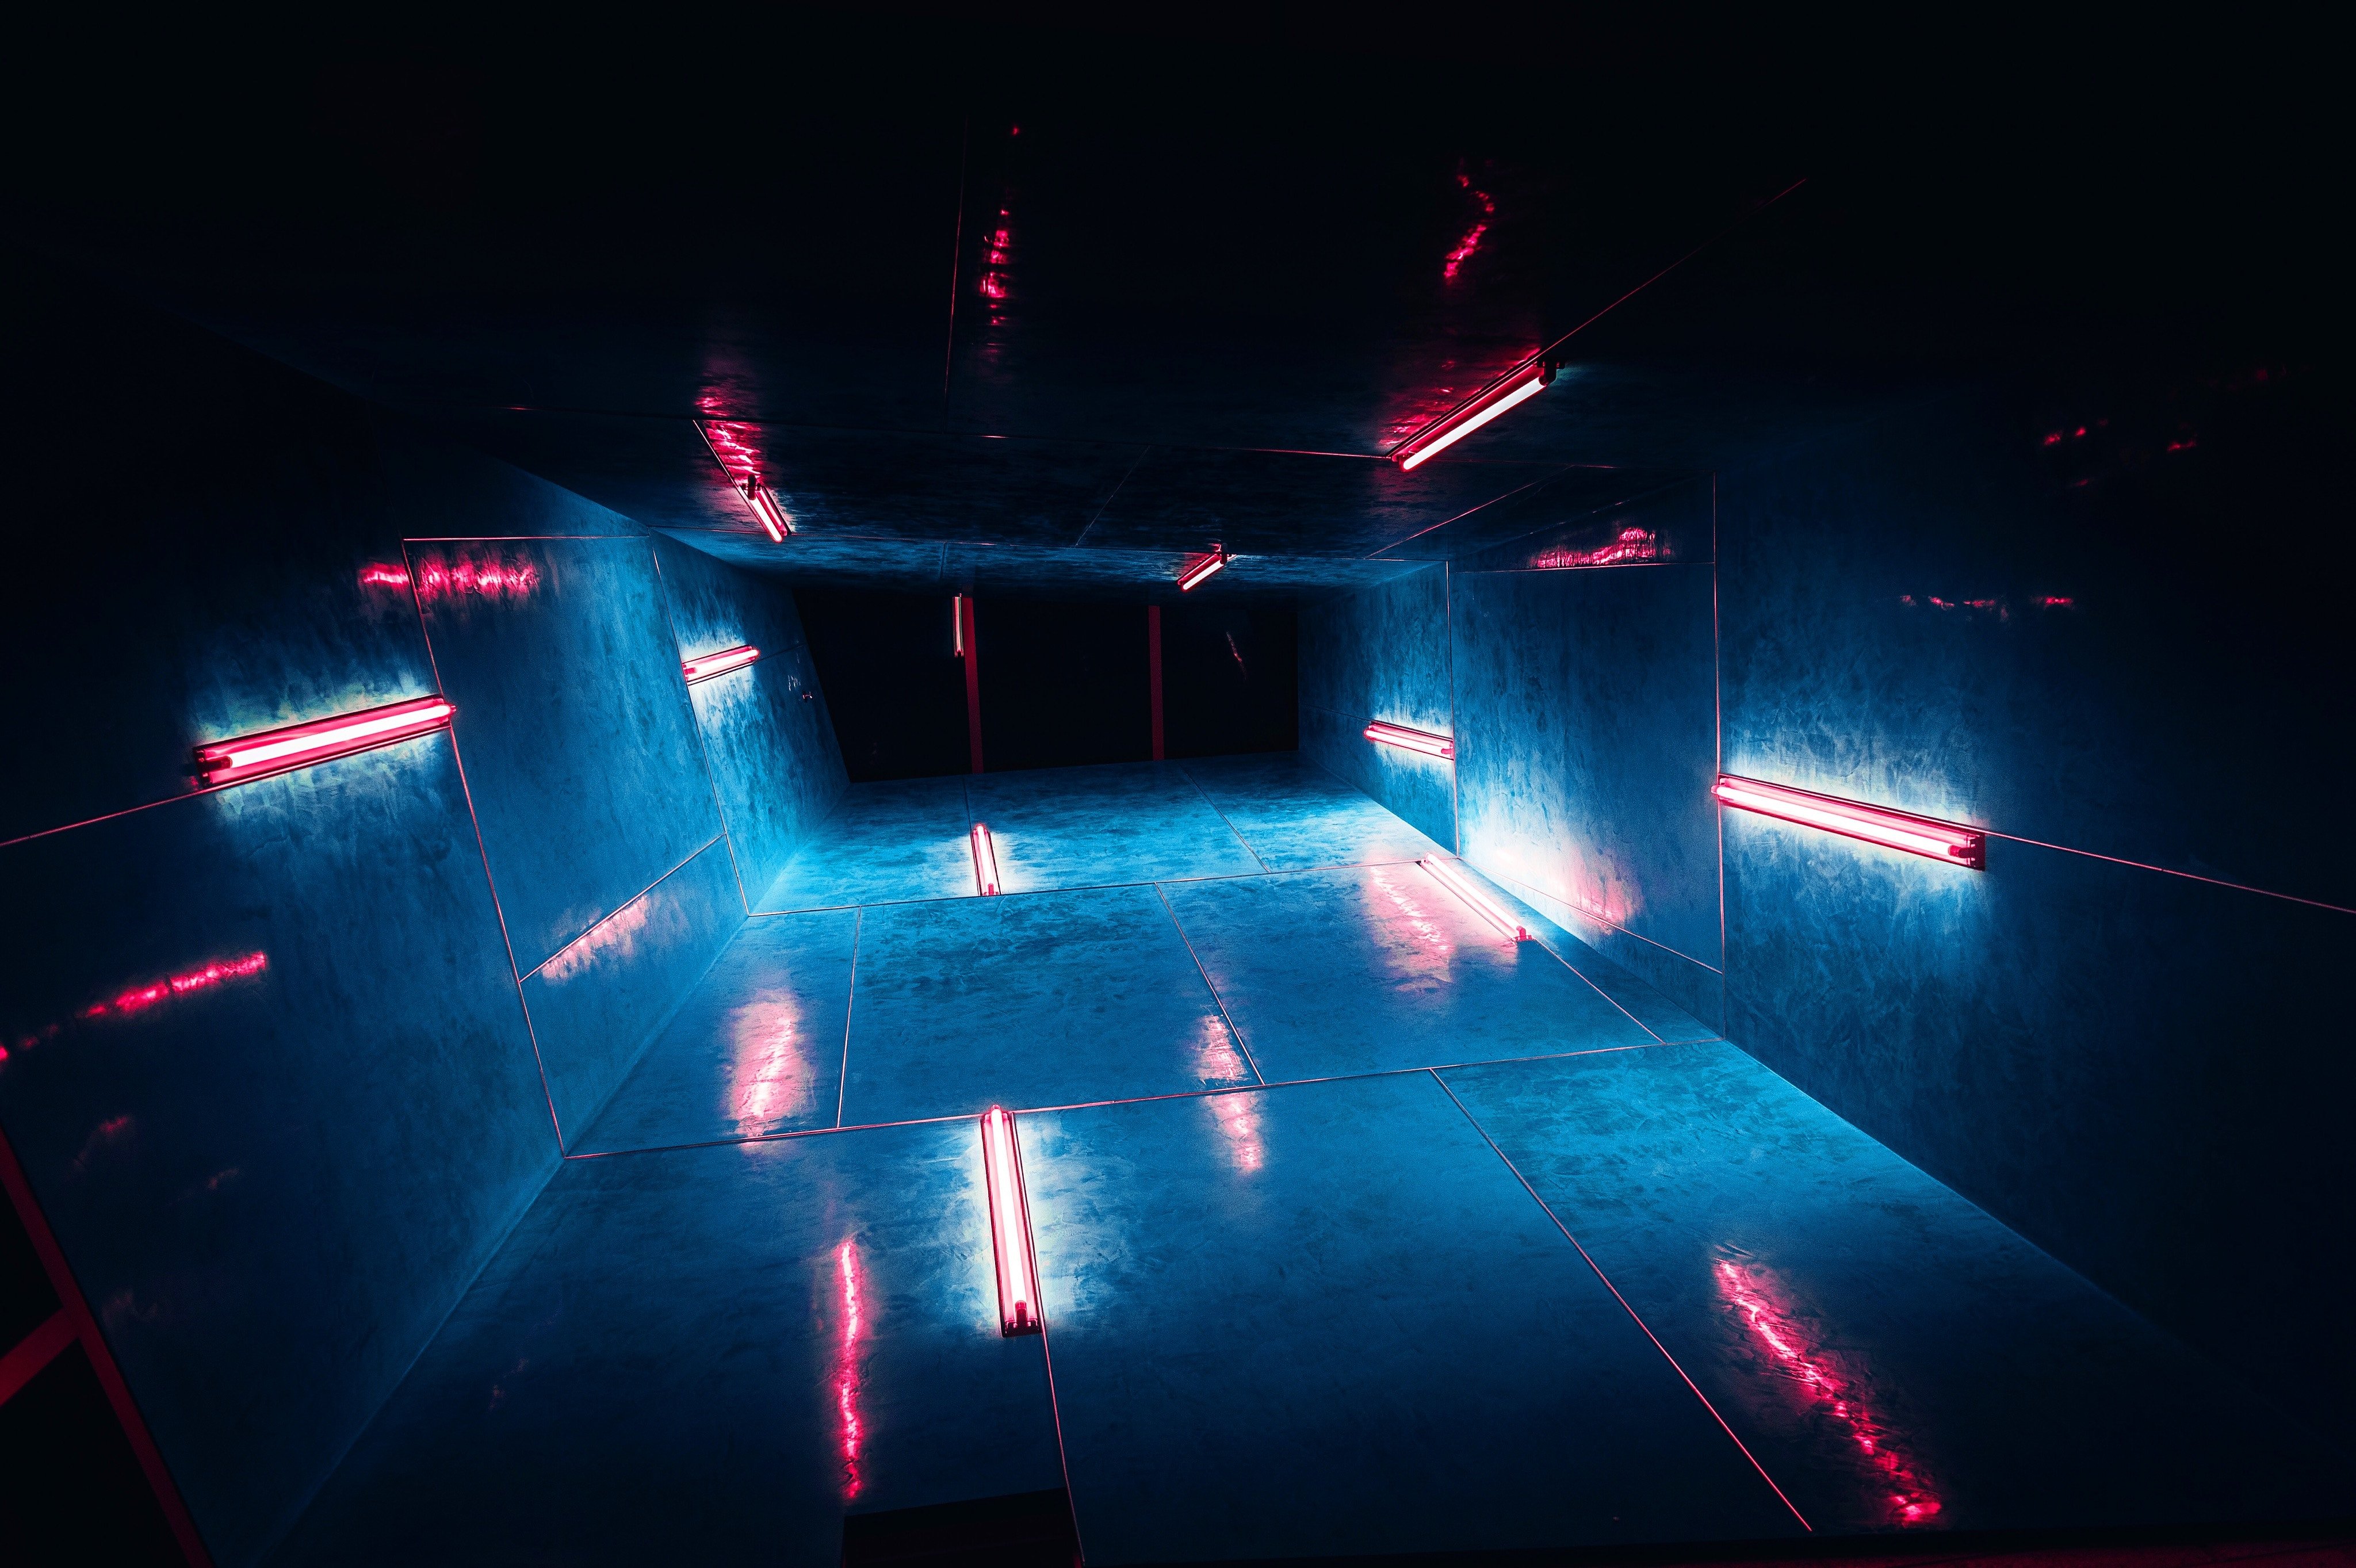 4096x2726 #metal, #light, #lonely, #tube lighting, #eerie, #aesthetic, #vibe, #concrete, #horror, #no person, #PNG image, #tunnel, #night, #dark, #evening, #color, #cool, #tron, #red, #blue Gallery HD Wallpaper